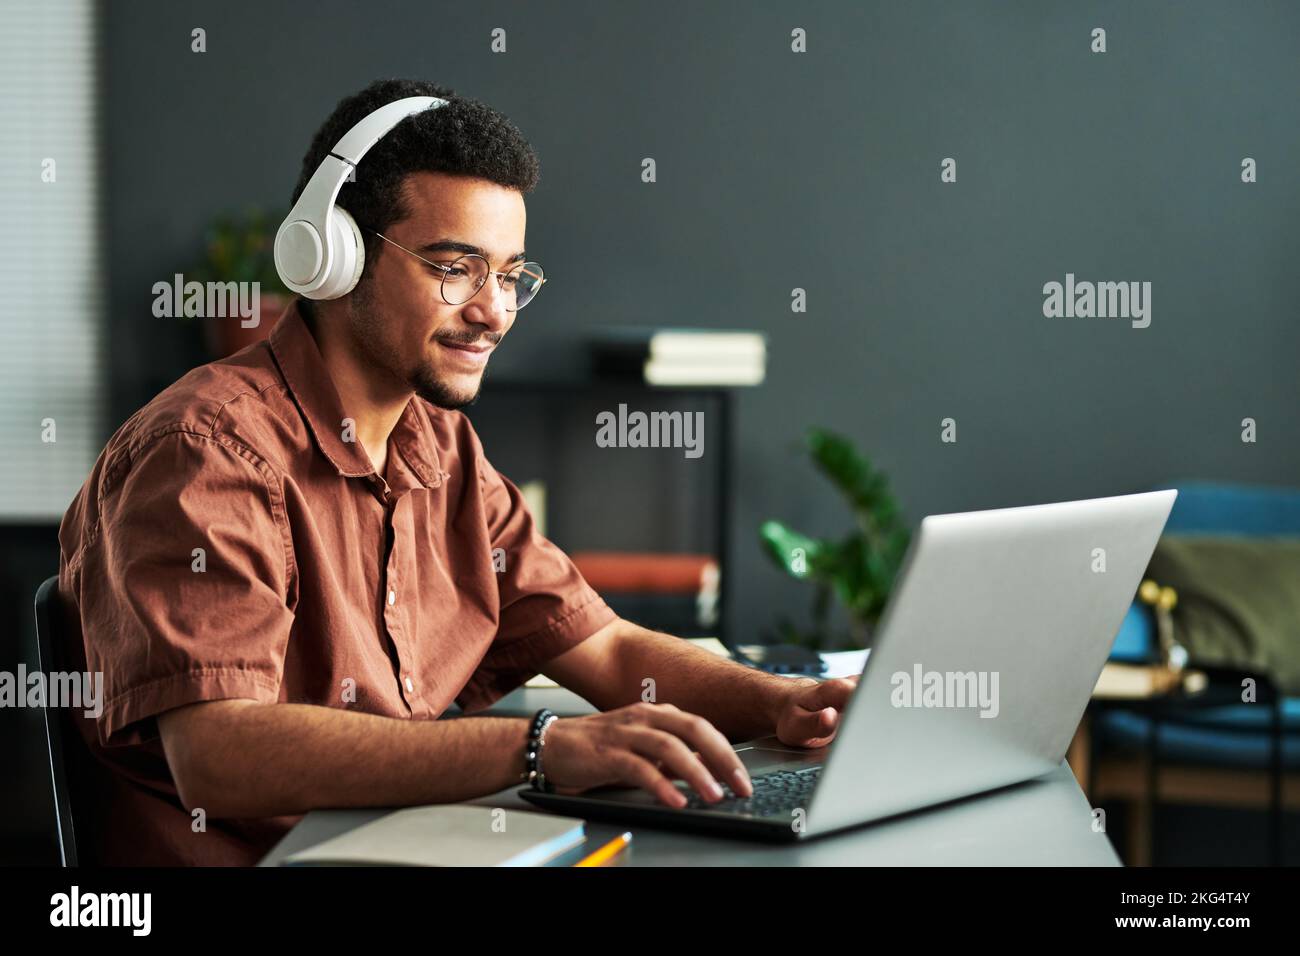 Young smiling man in headphones typing on laptop keyboard while sitting by workplace and taking part in online webinar or lesson Stock Photo